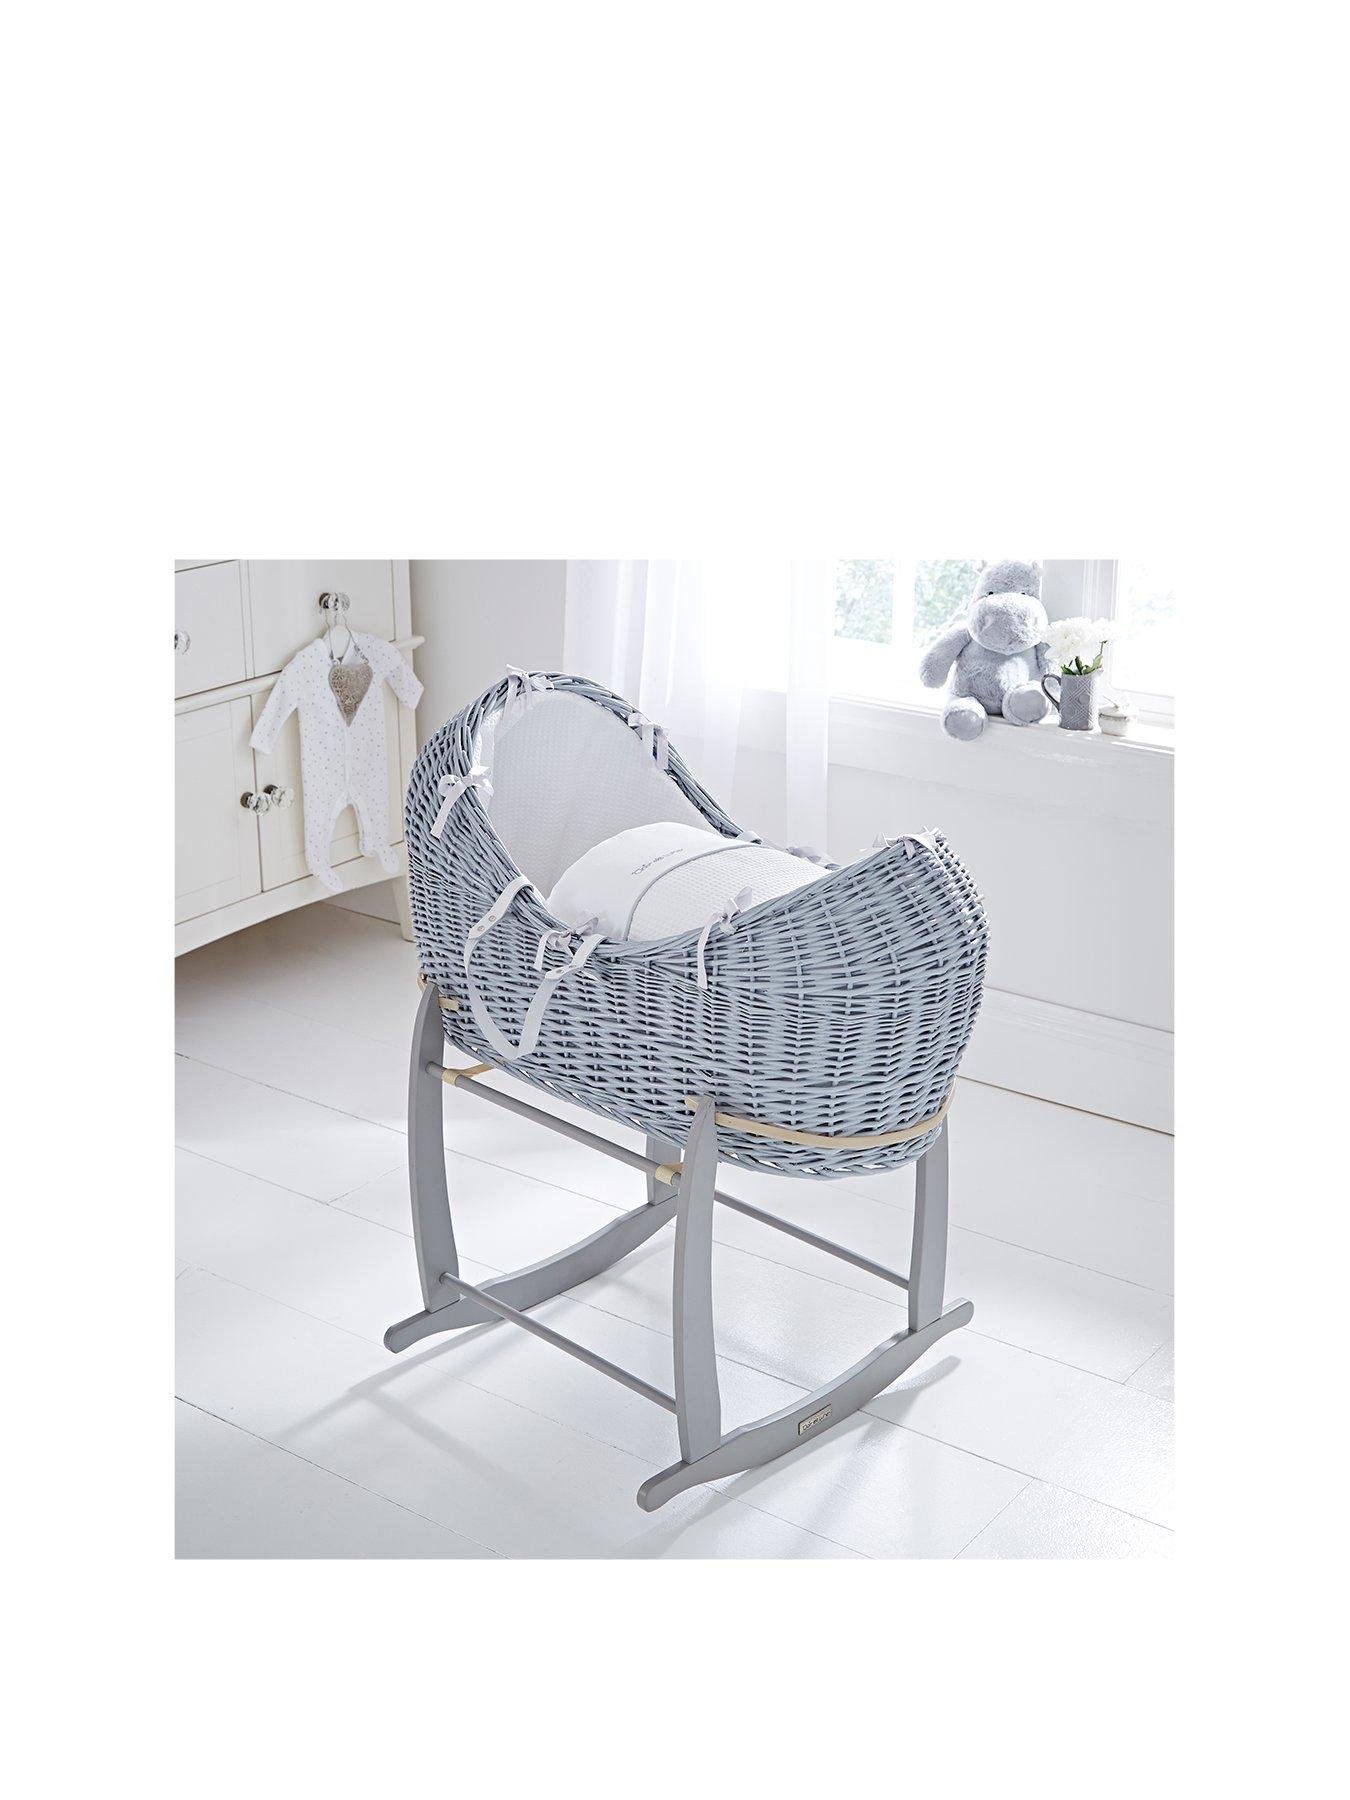 noah moses basket and stand